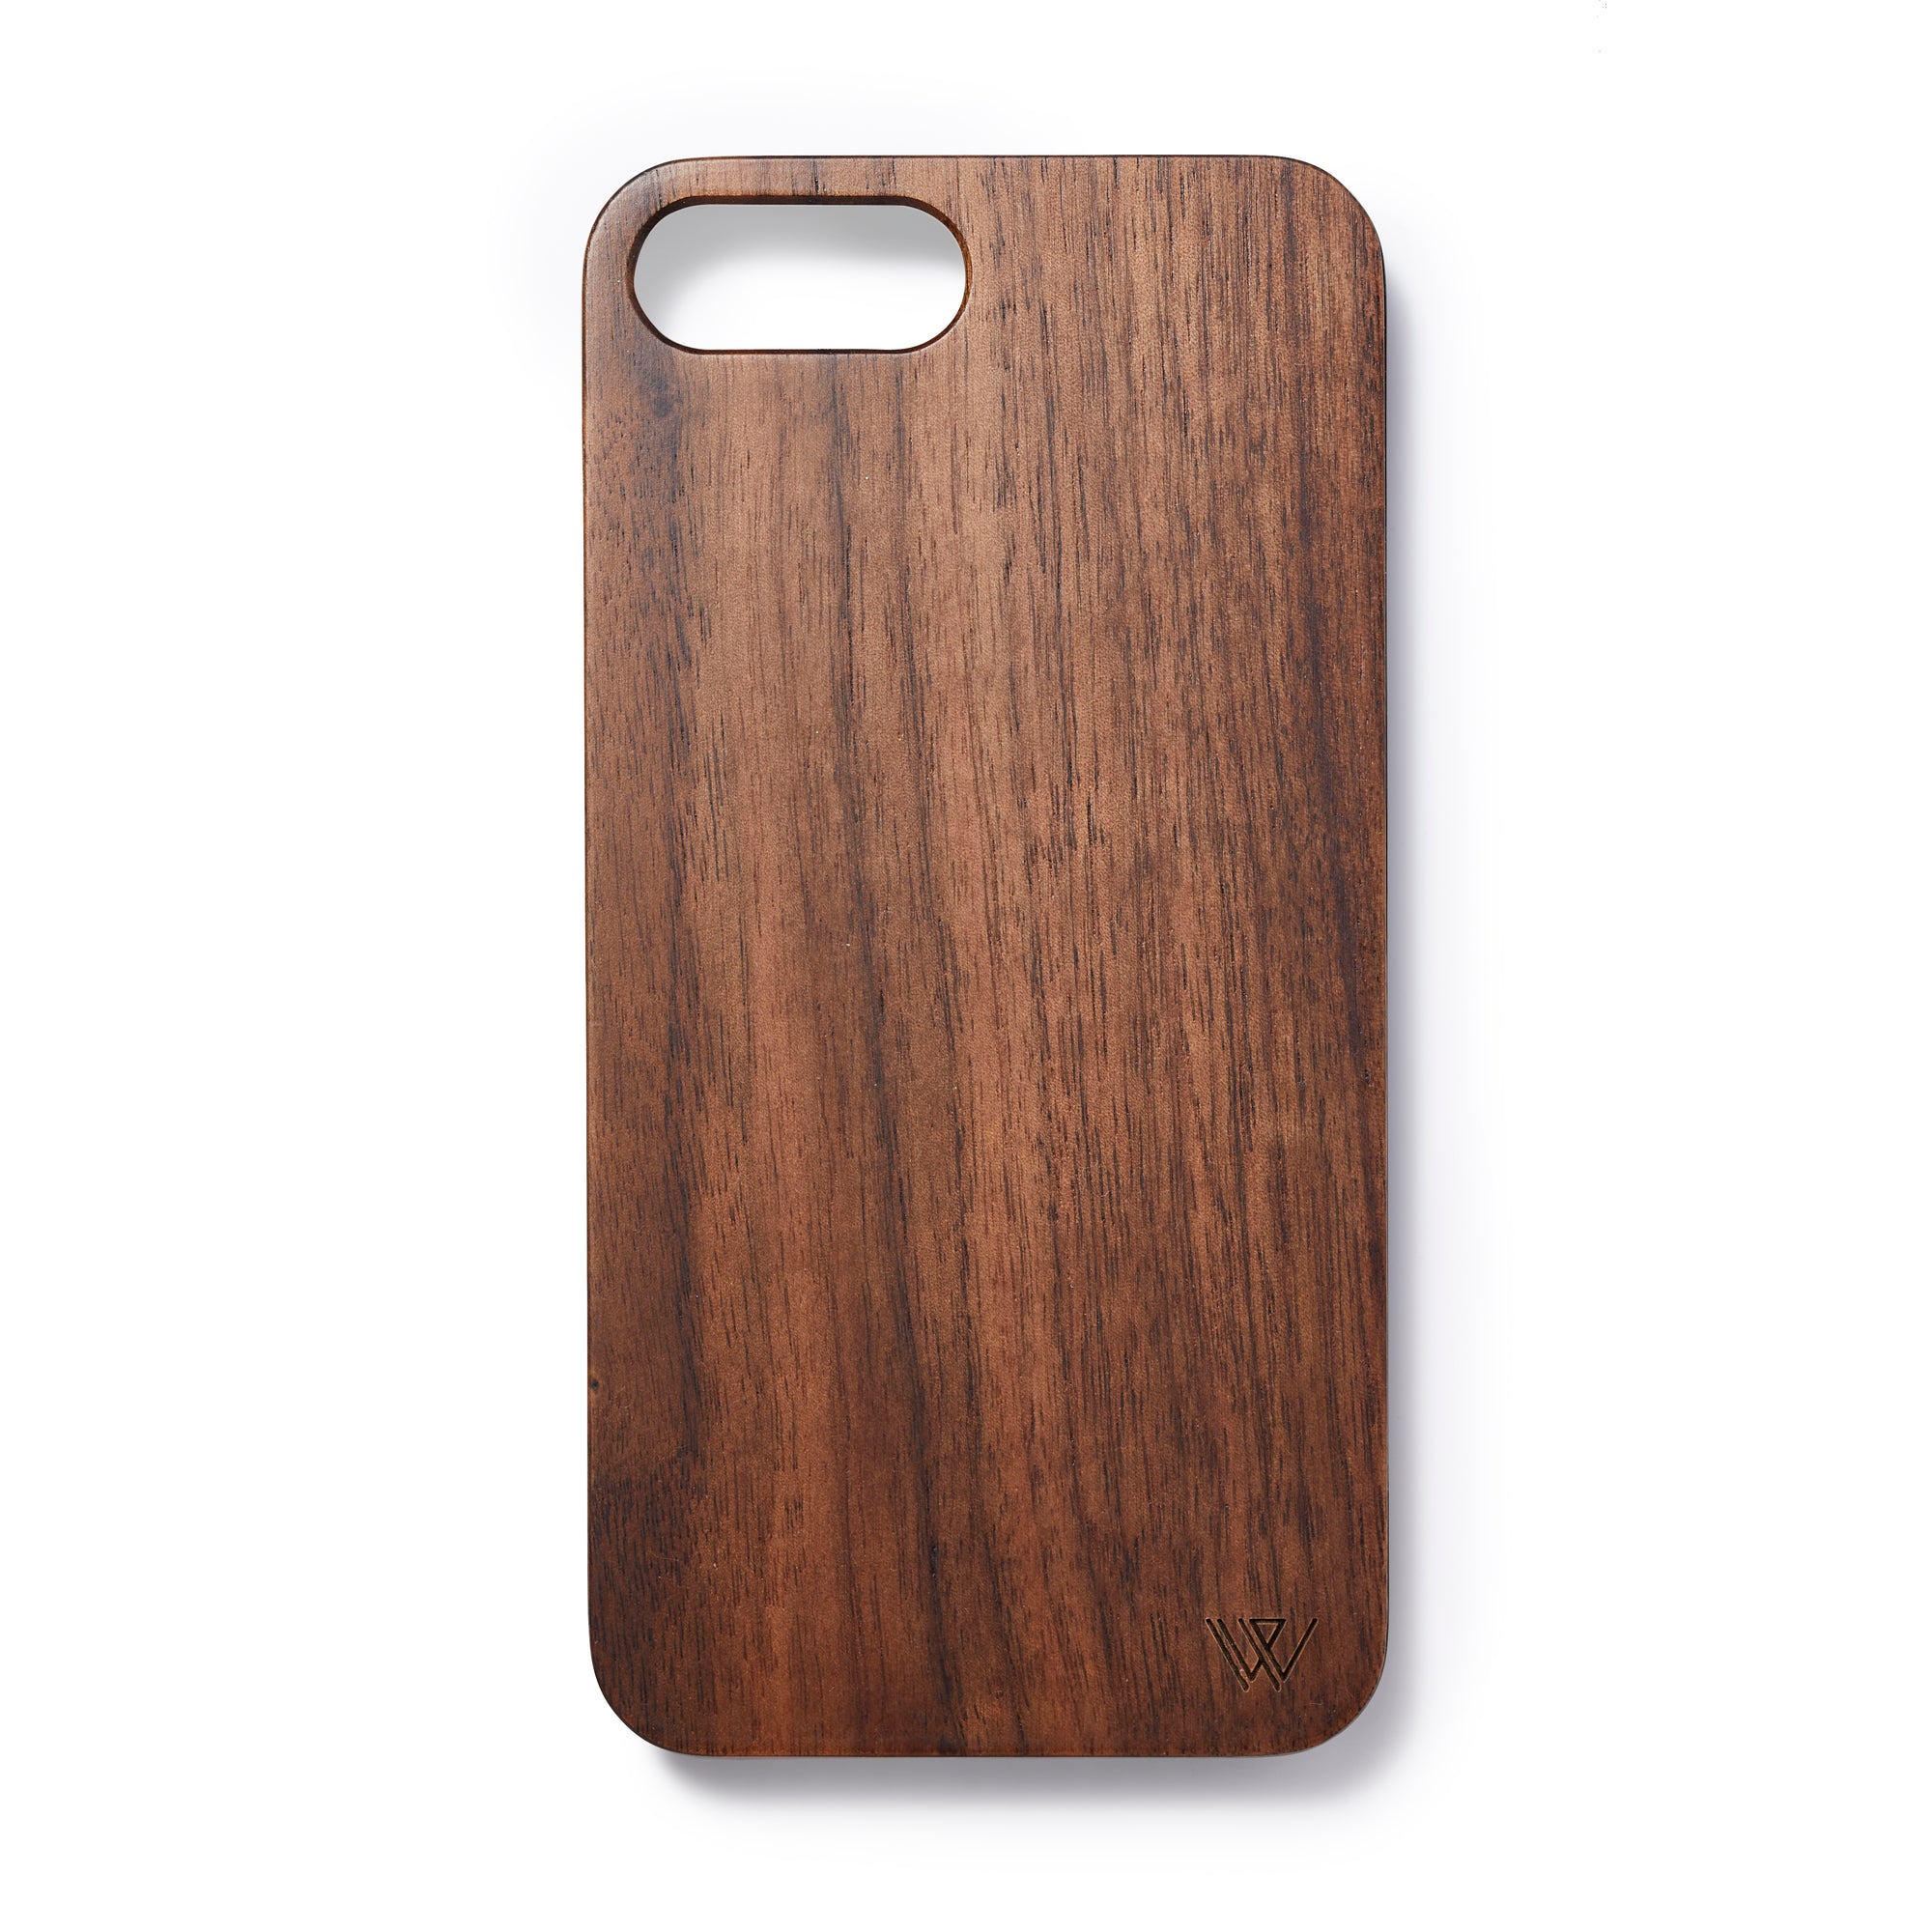 Wooden Iphone 6,7 and 8 plus back case walnut - Woodstylz